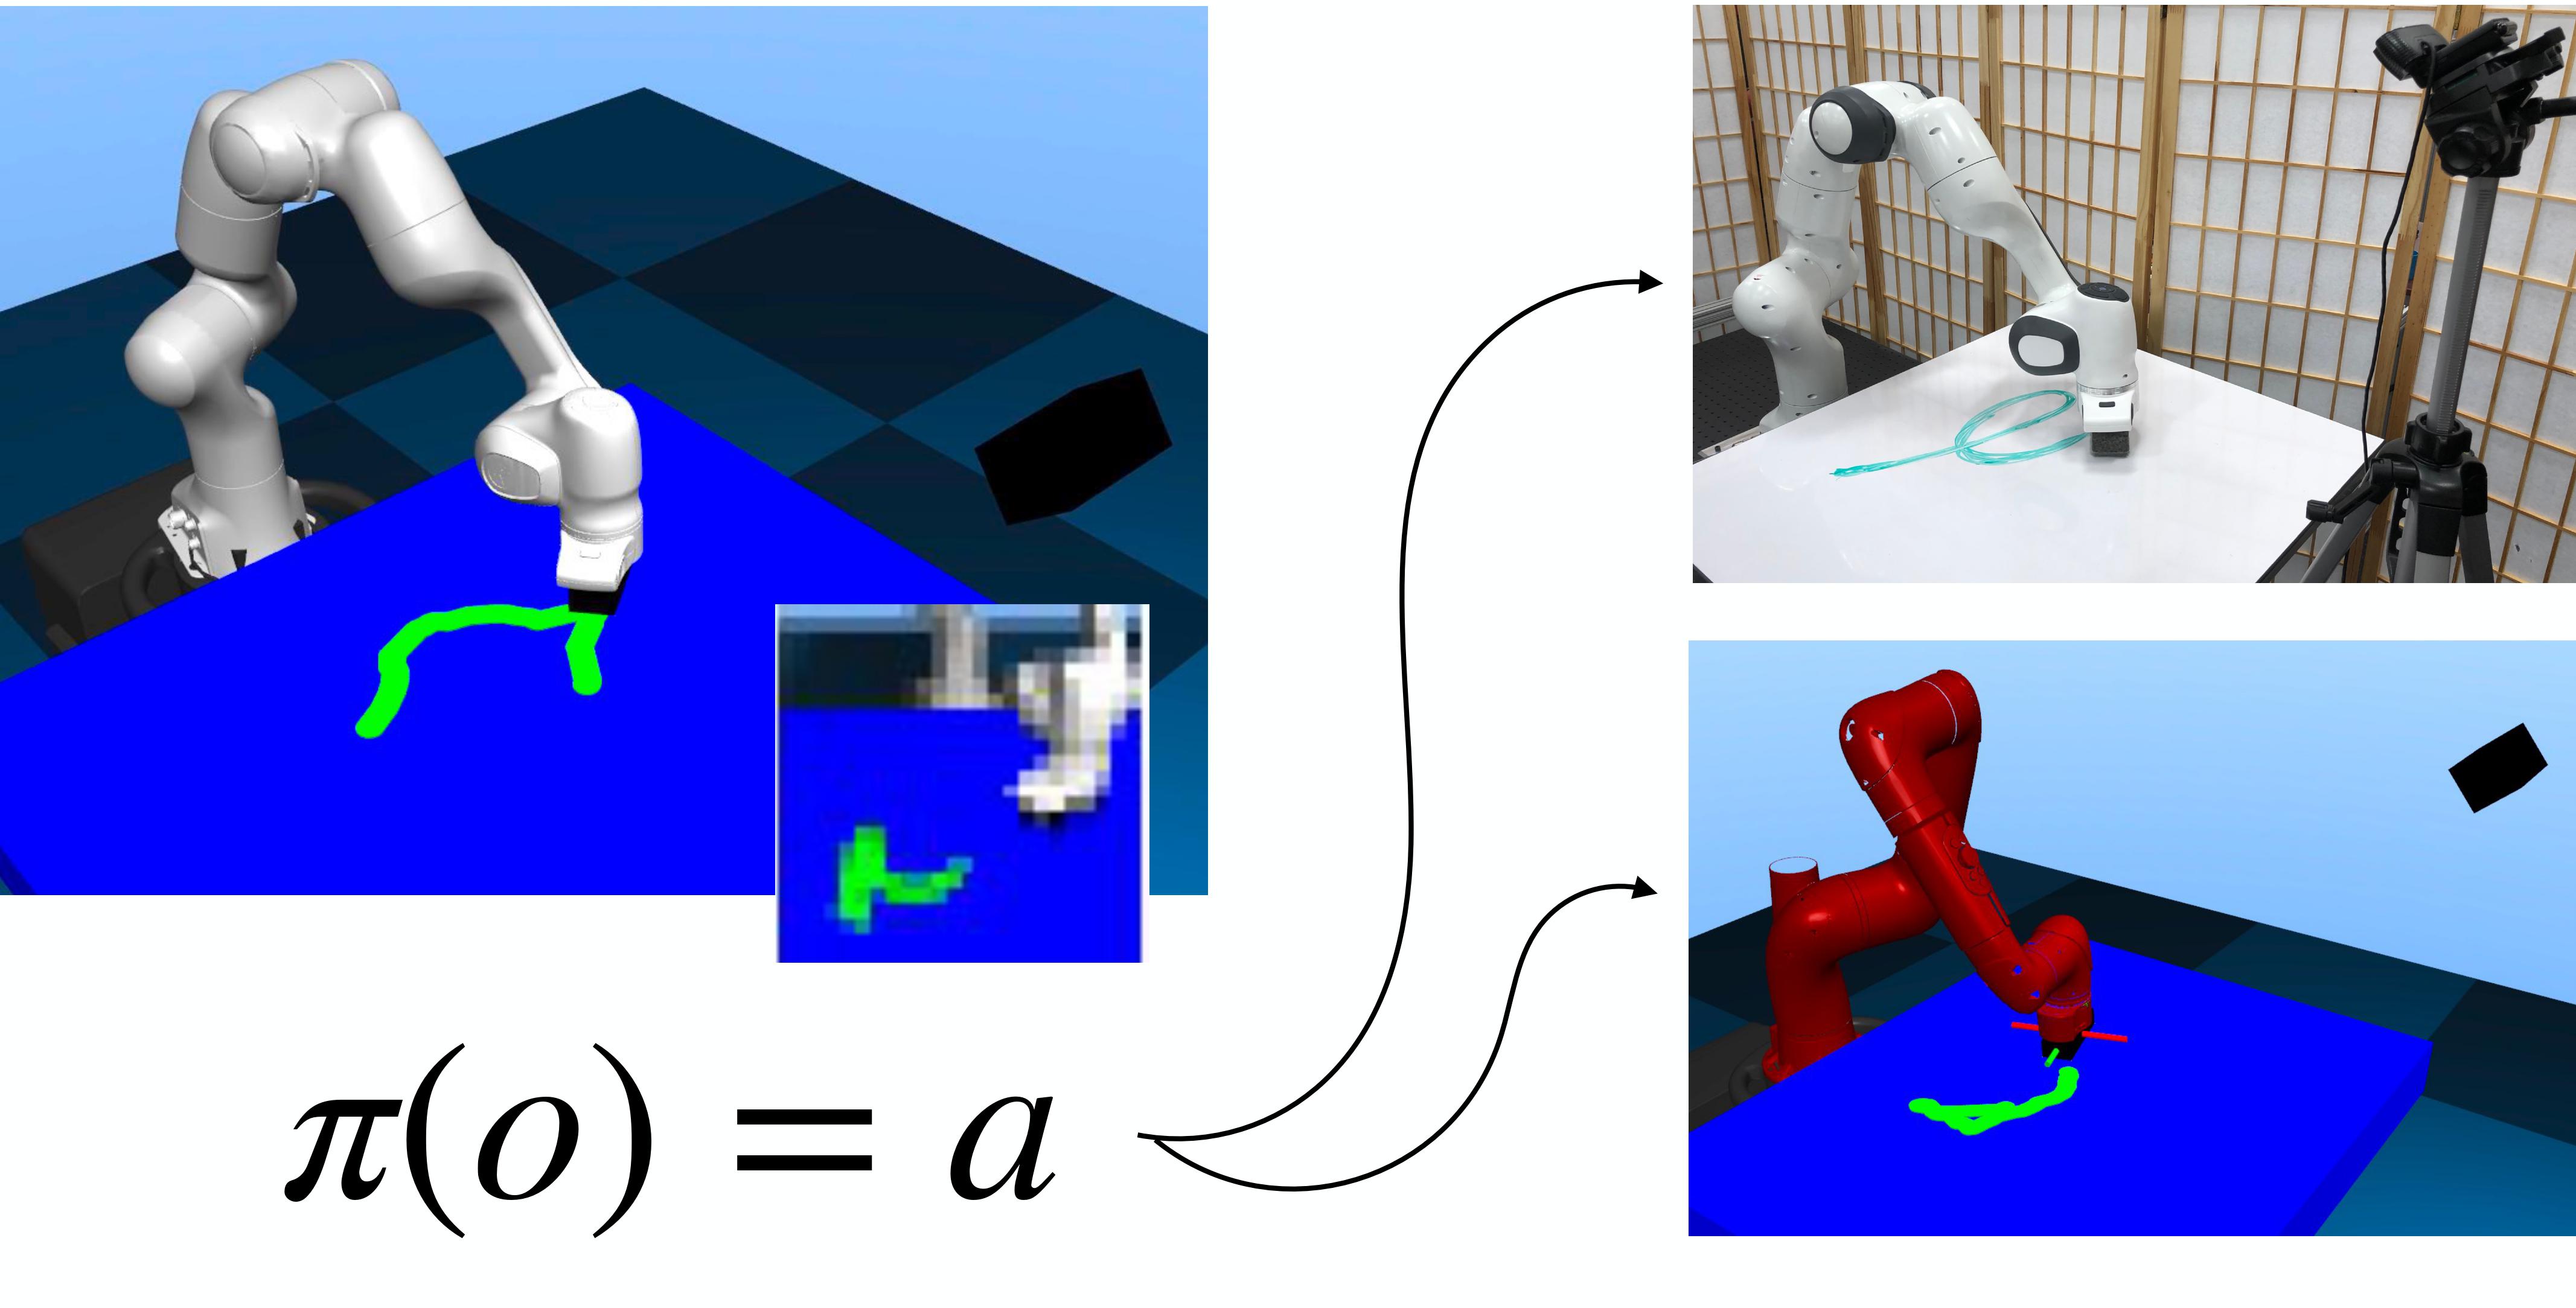 Variable Impedance Control in End-Effector Space: An Action Space for Reinforcement Learning in Contact-Rich Tasks